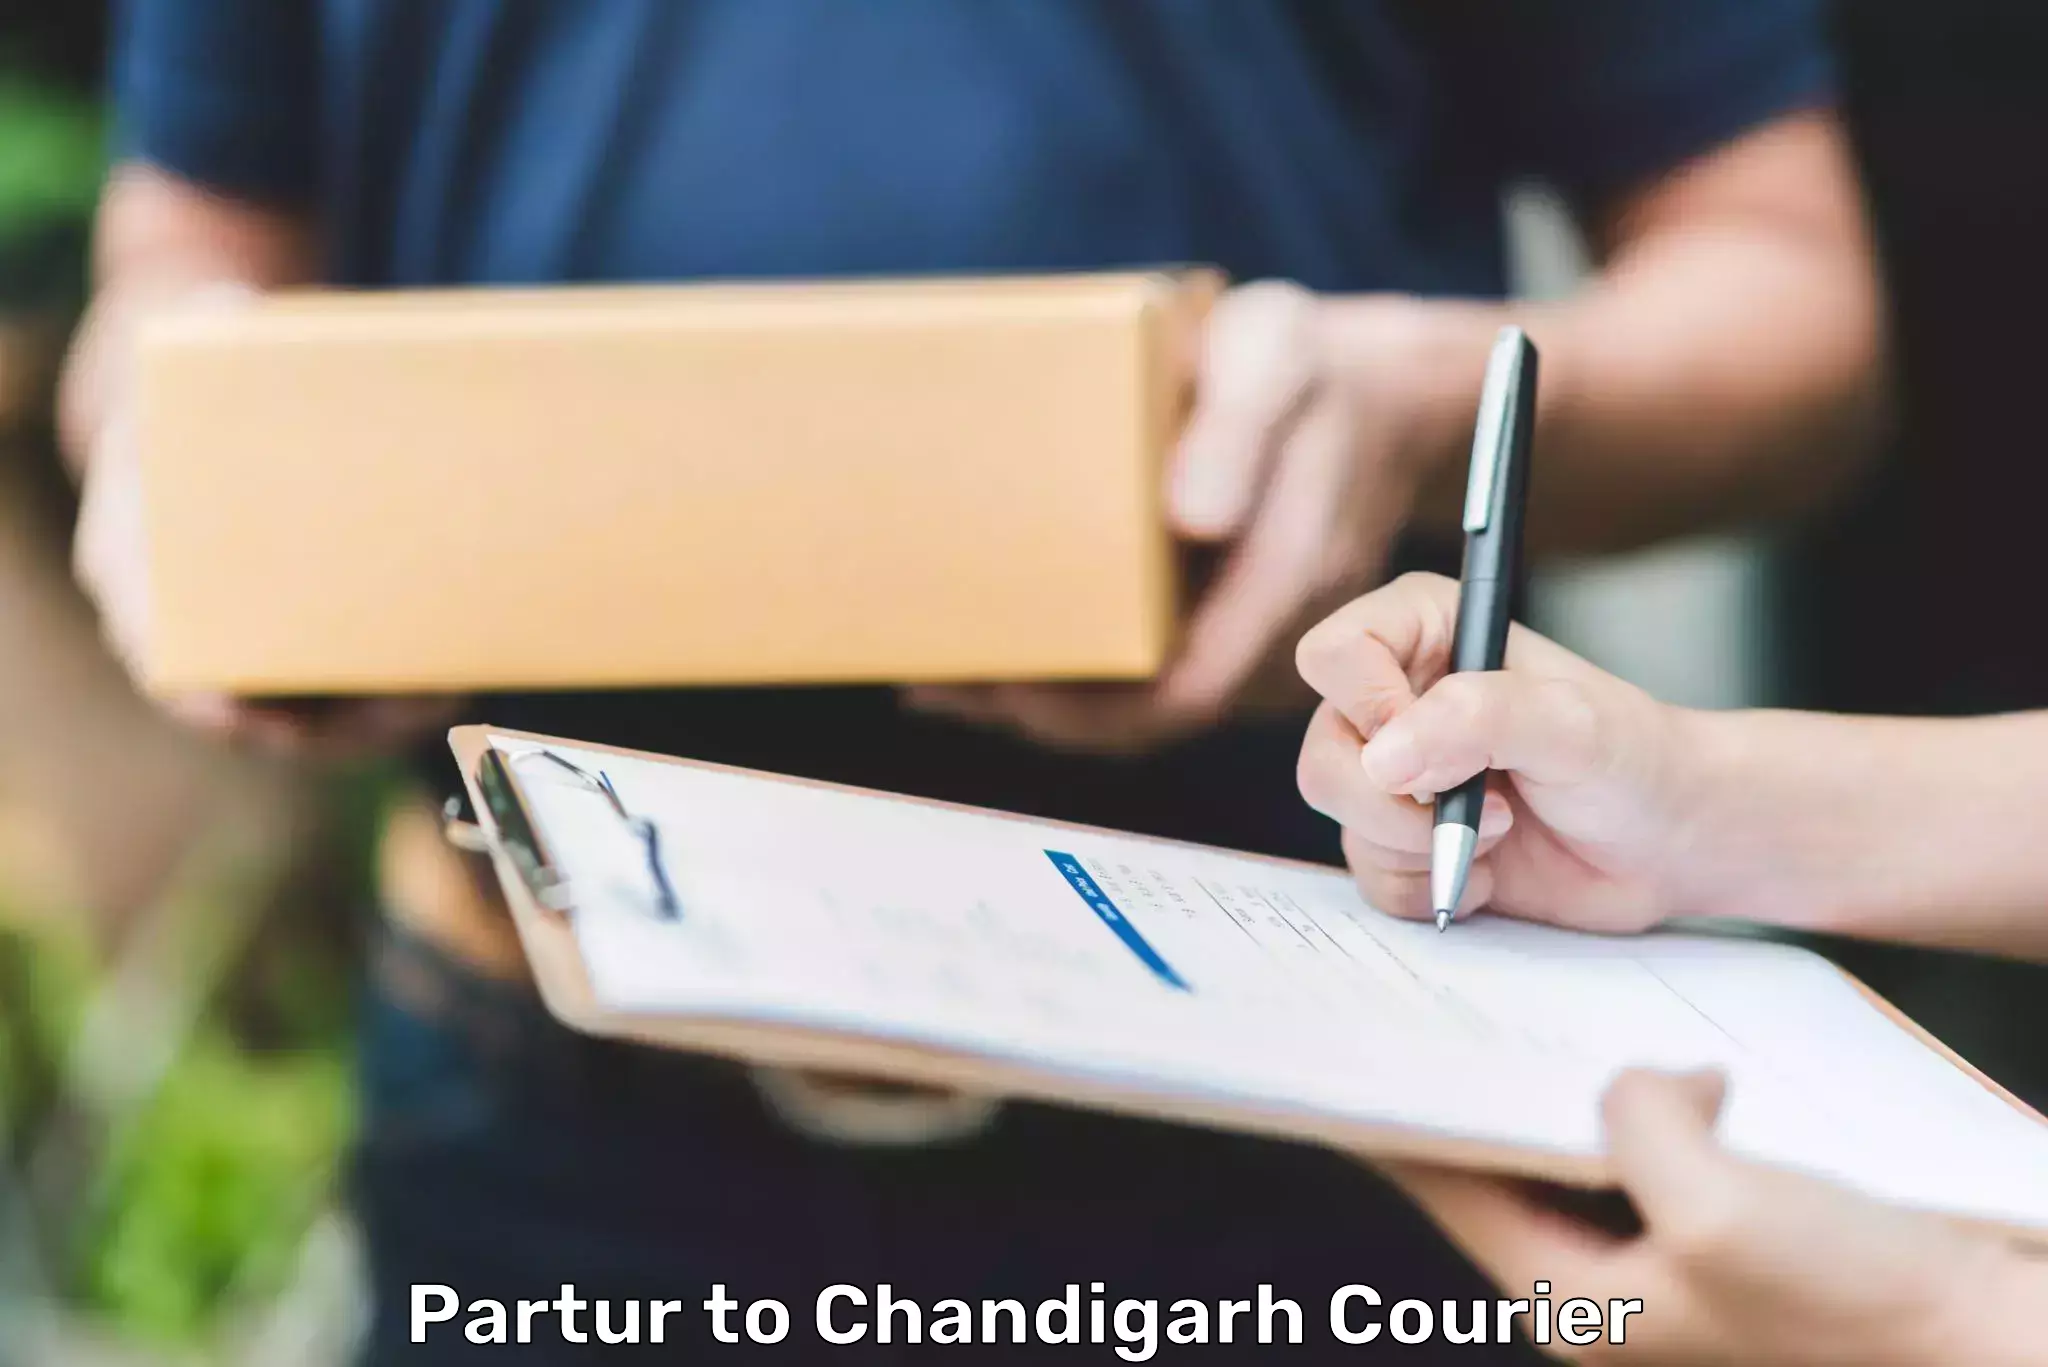 On-demand shipping options Partur to Chandigarh